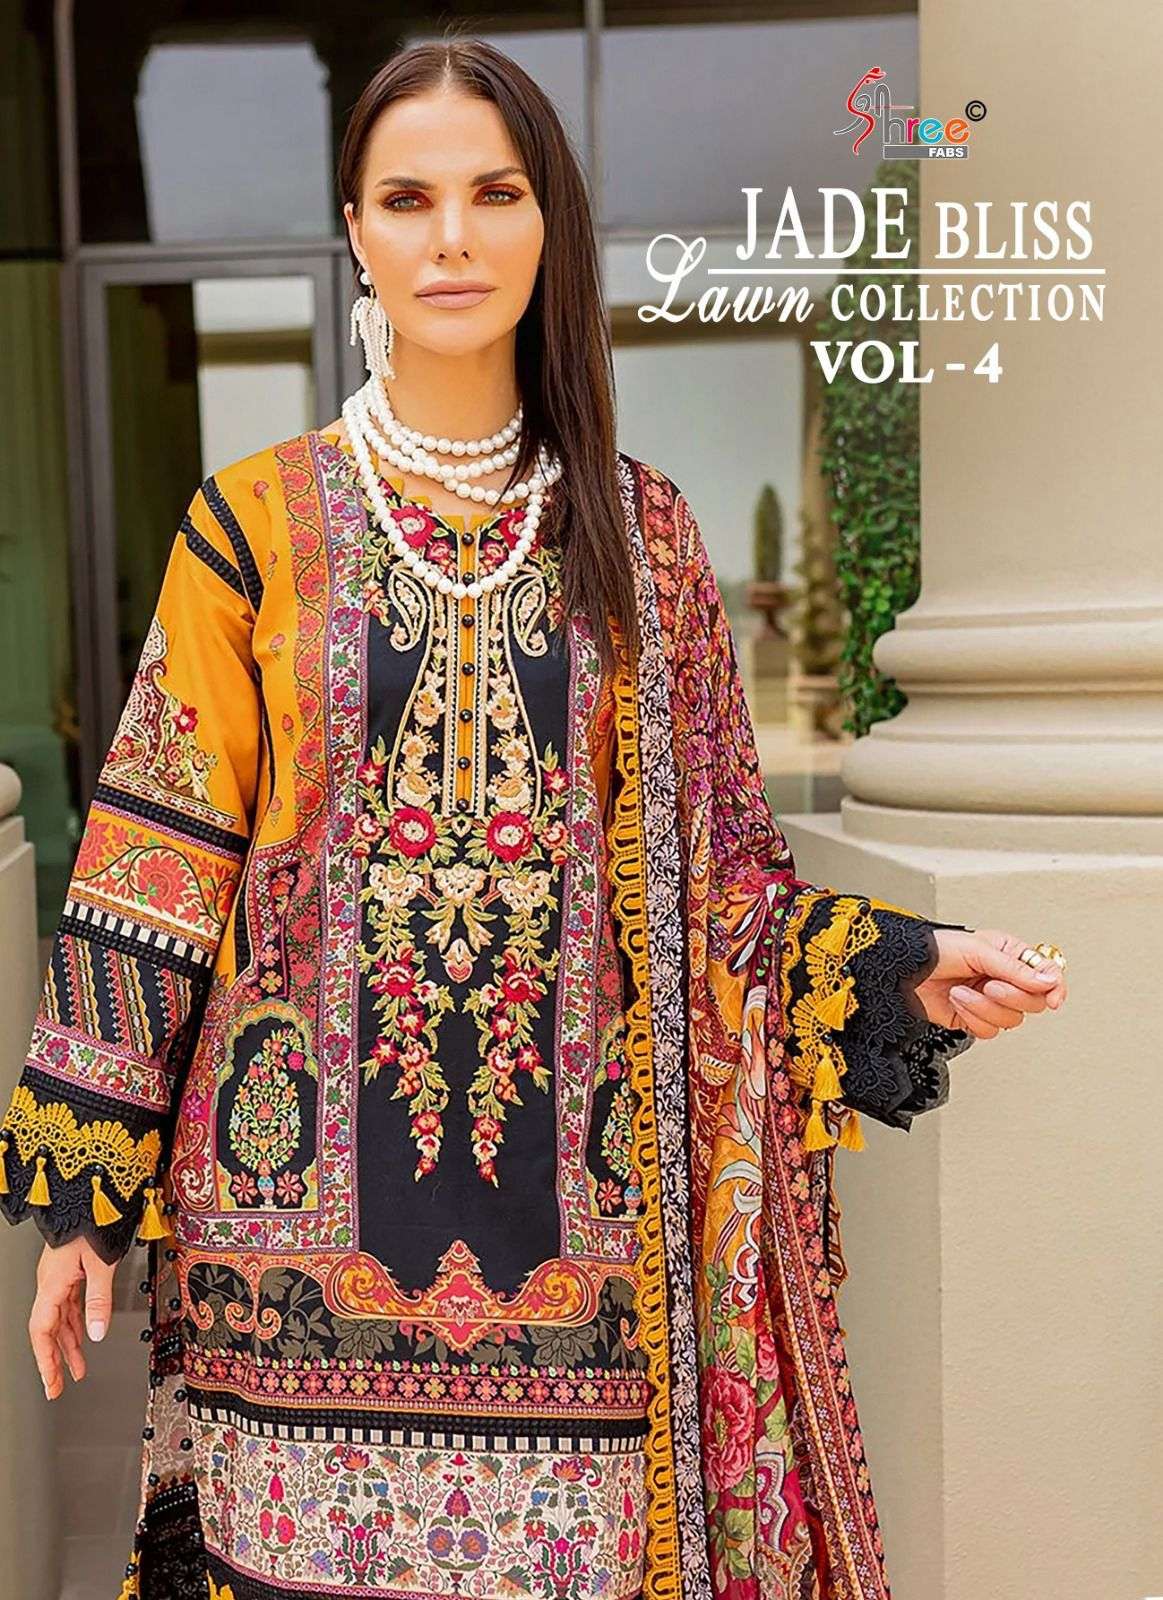 SHREE FABS JADE BLISS LAWN COLLECTION VOL 4